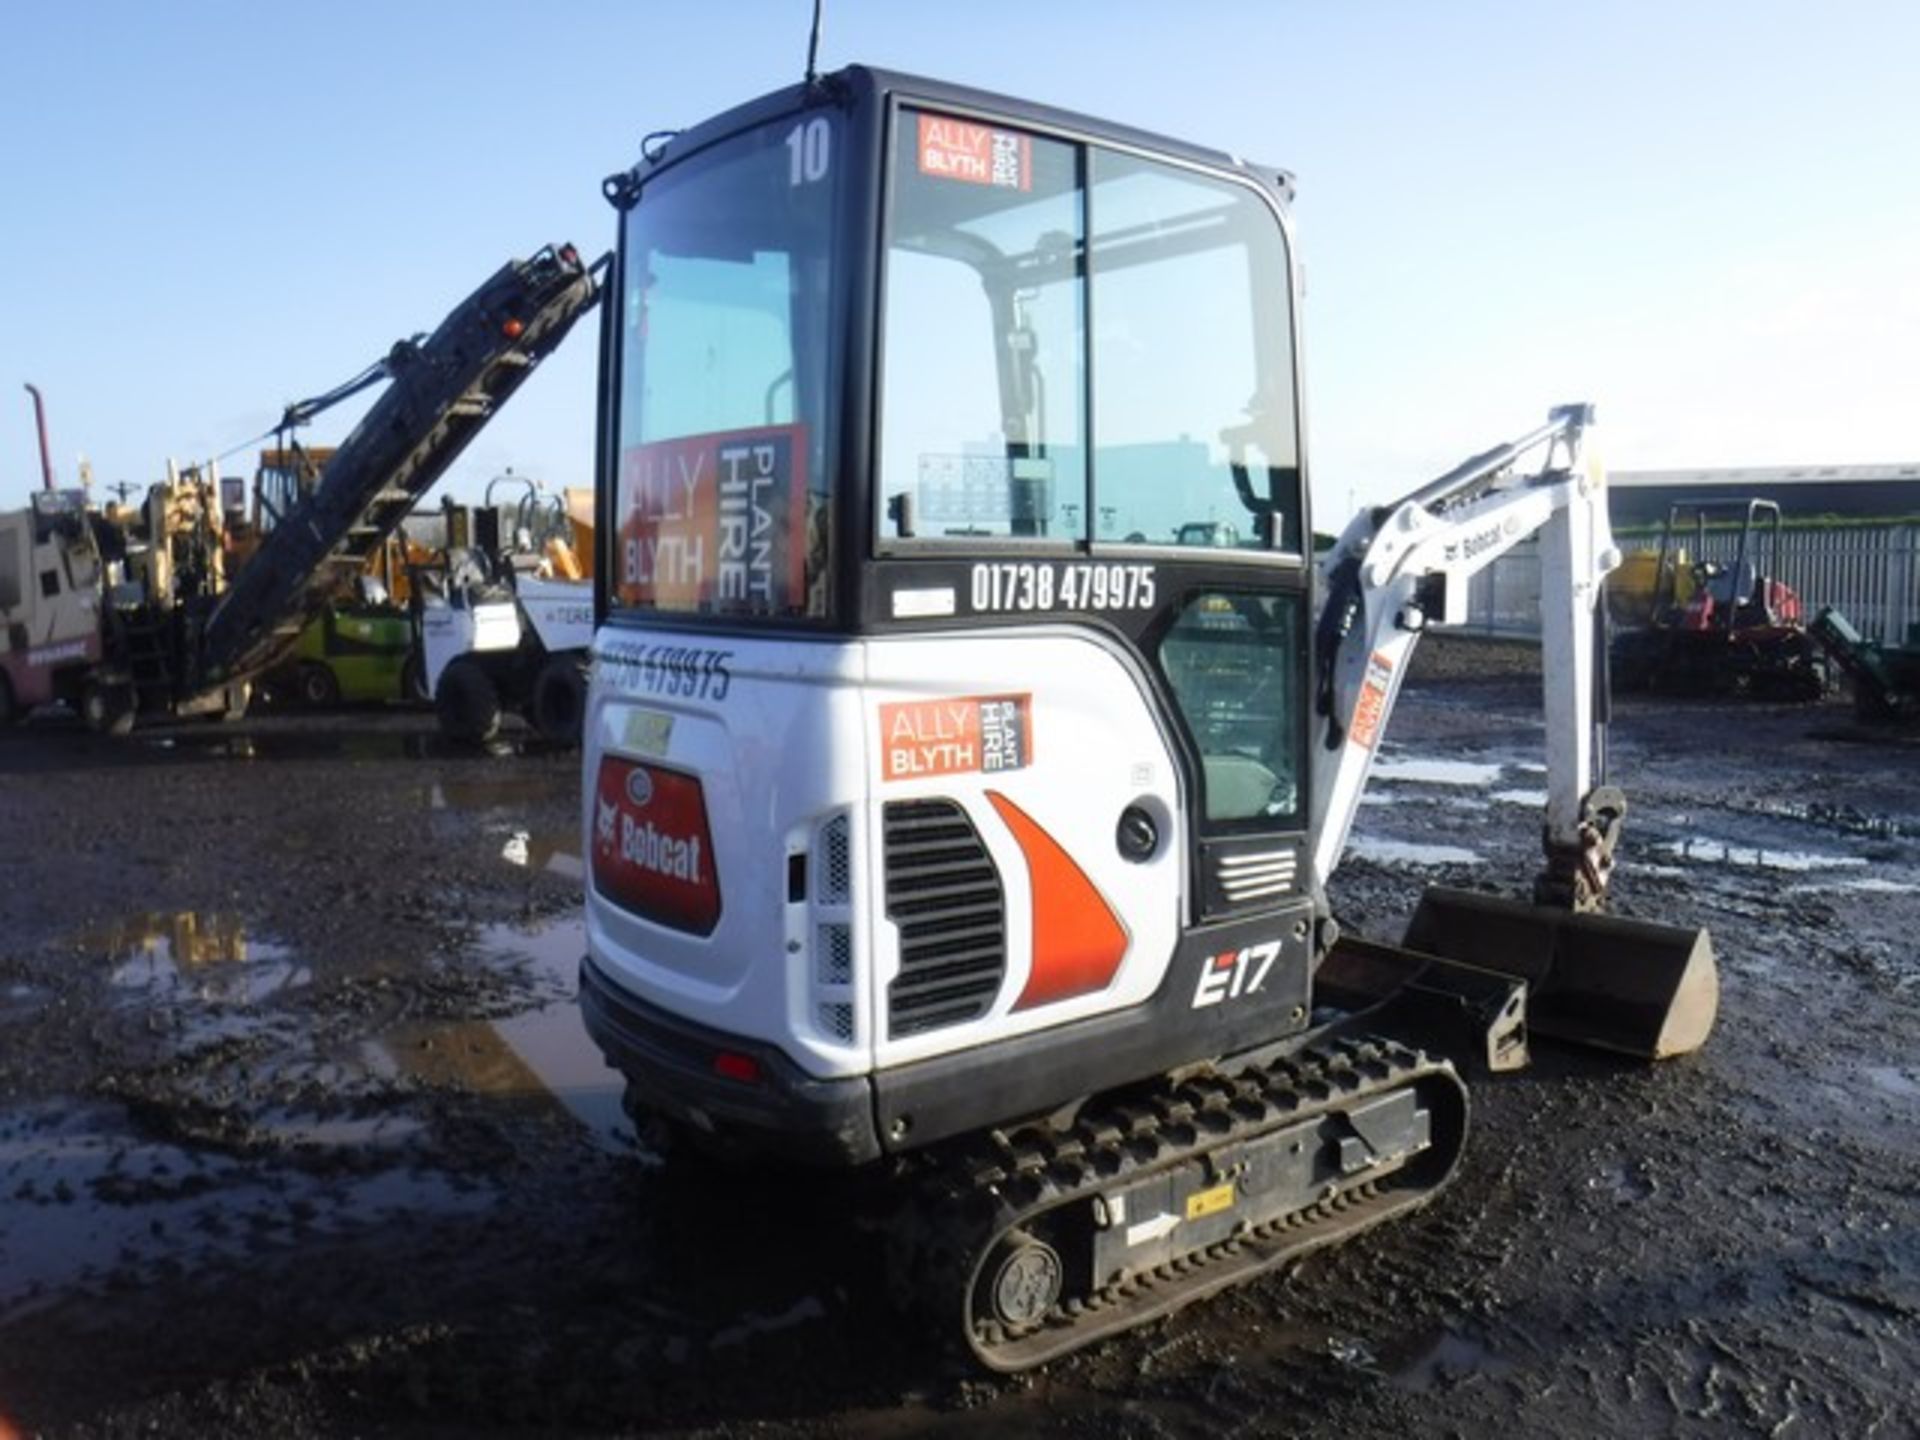 BOB CAT E17 - 2018 COMPACT EXCAVATOR WITH CAB 118 HRS (NOT VERIFIED) SN - B27H12773 - Image 7 of 10